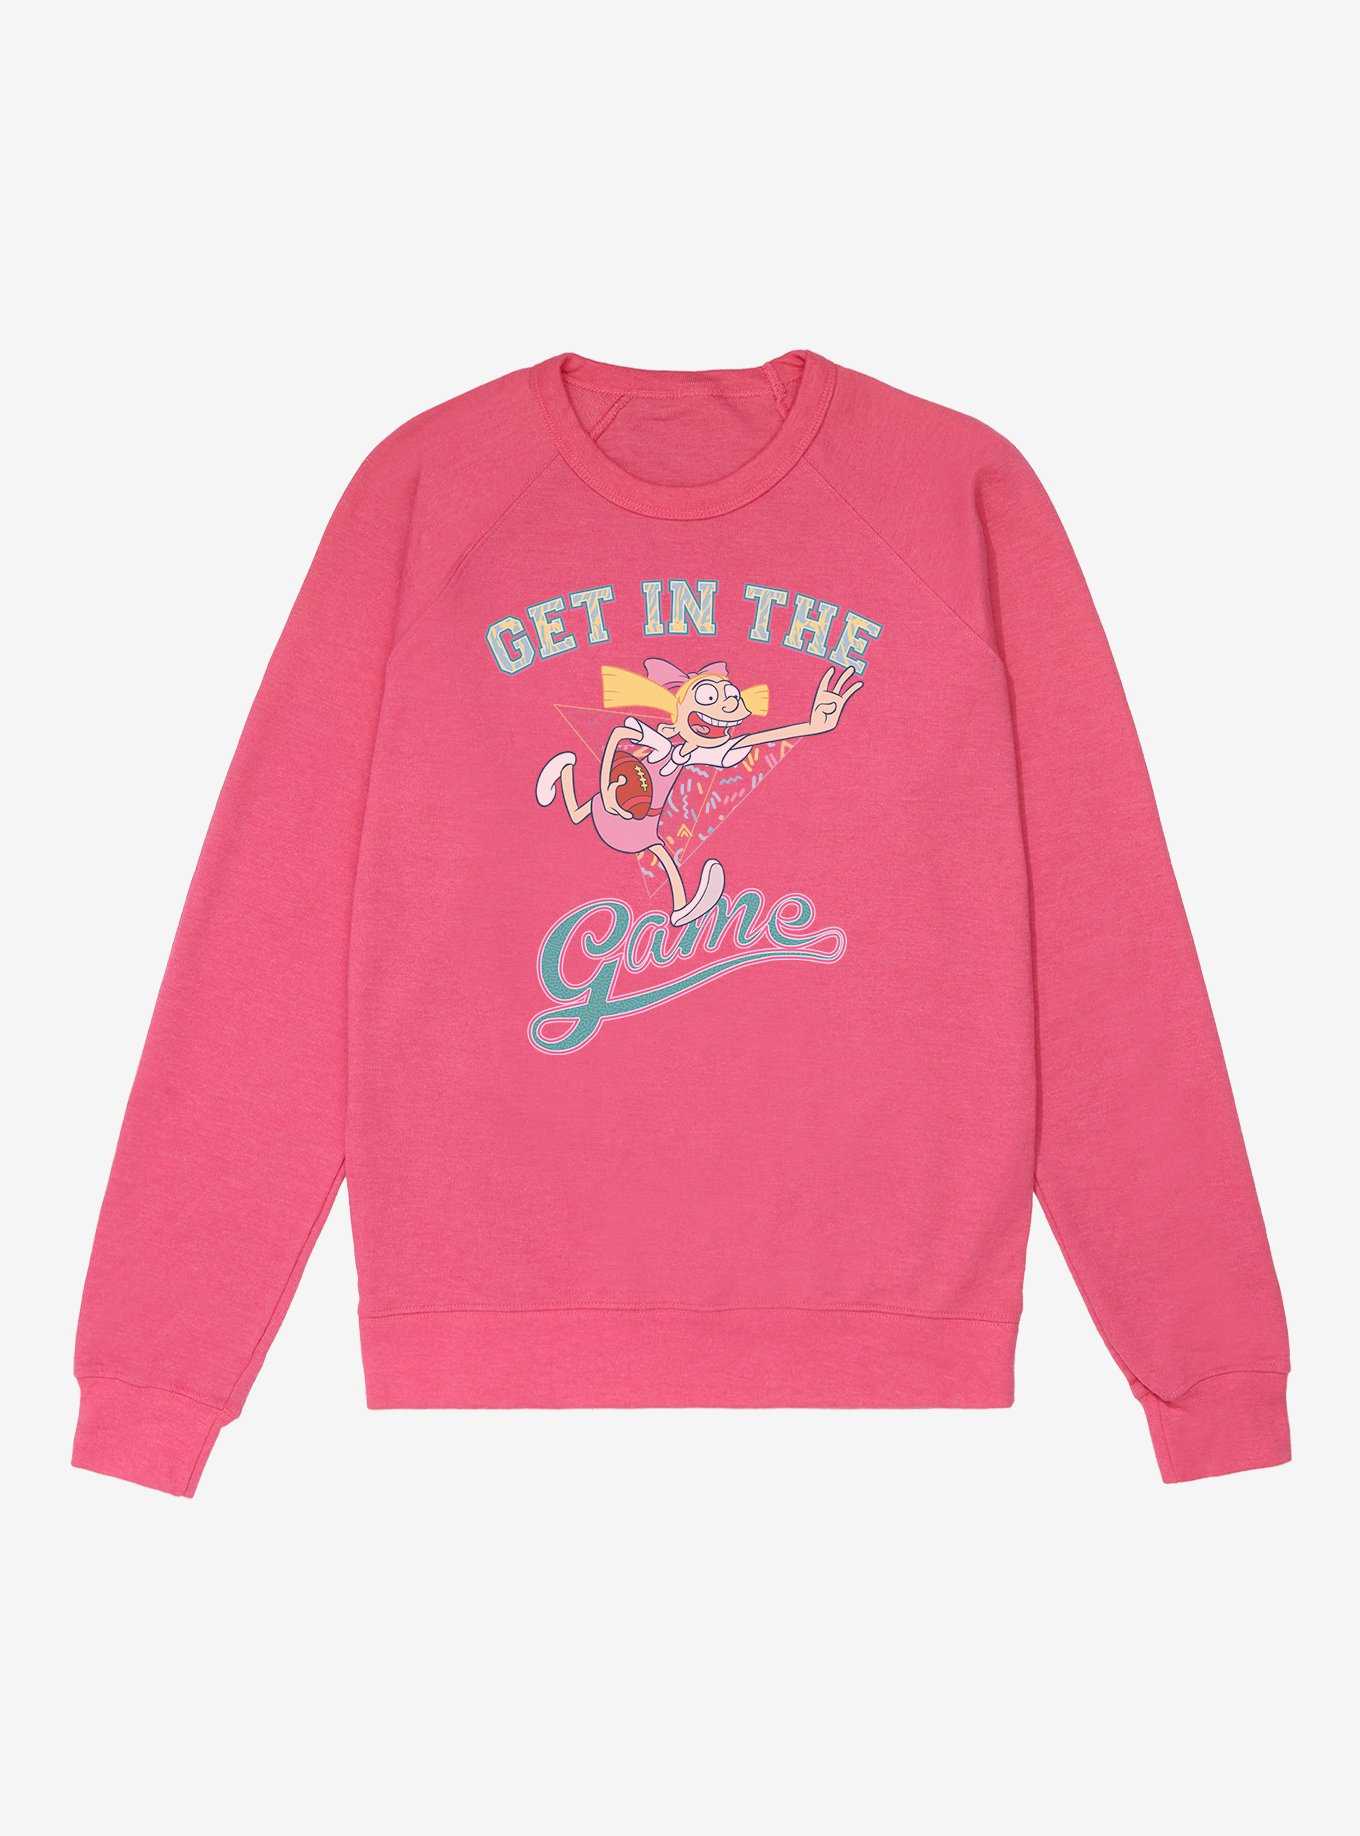 Hey Arnold! Get In The Game French Terry Sweatshirt, , hi-res